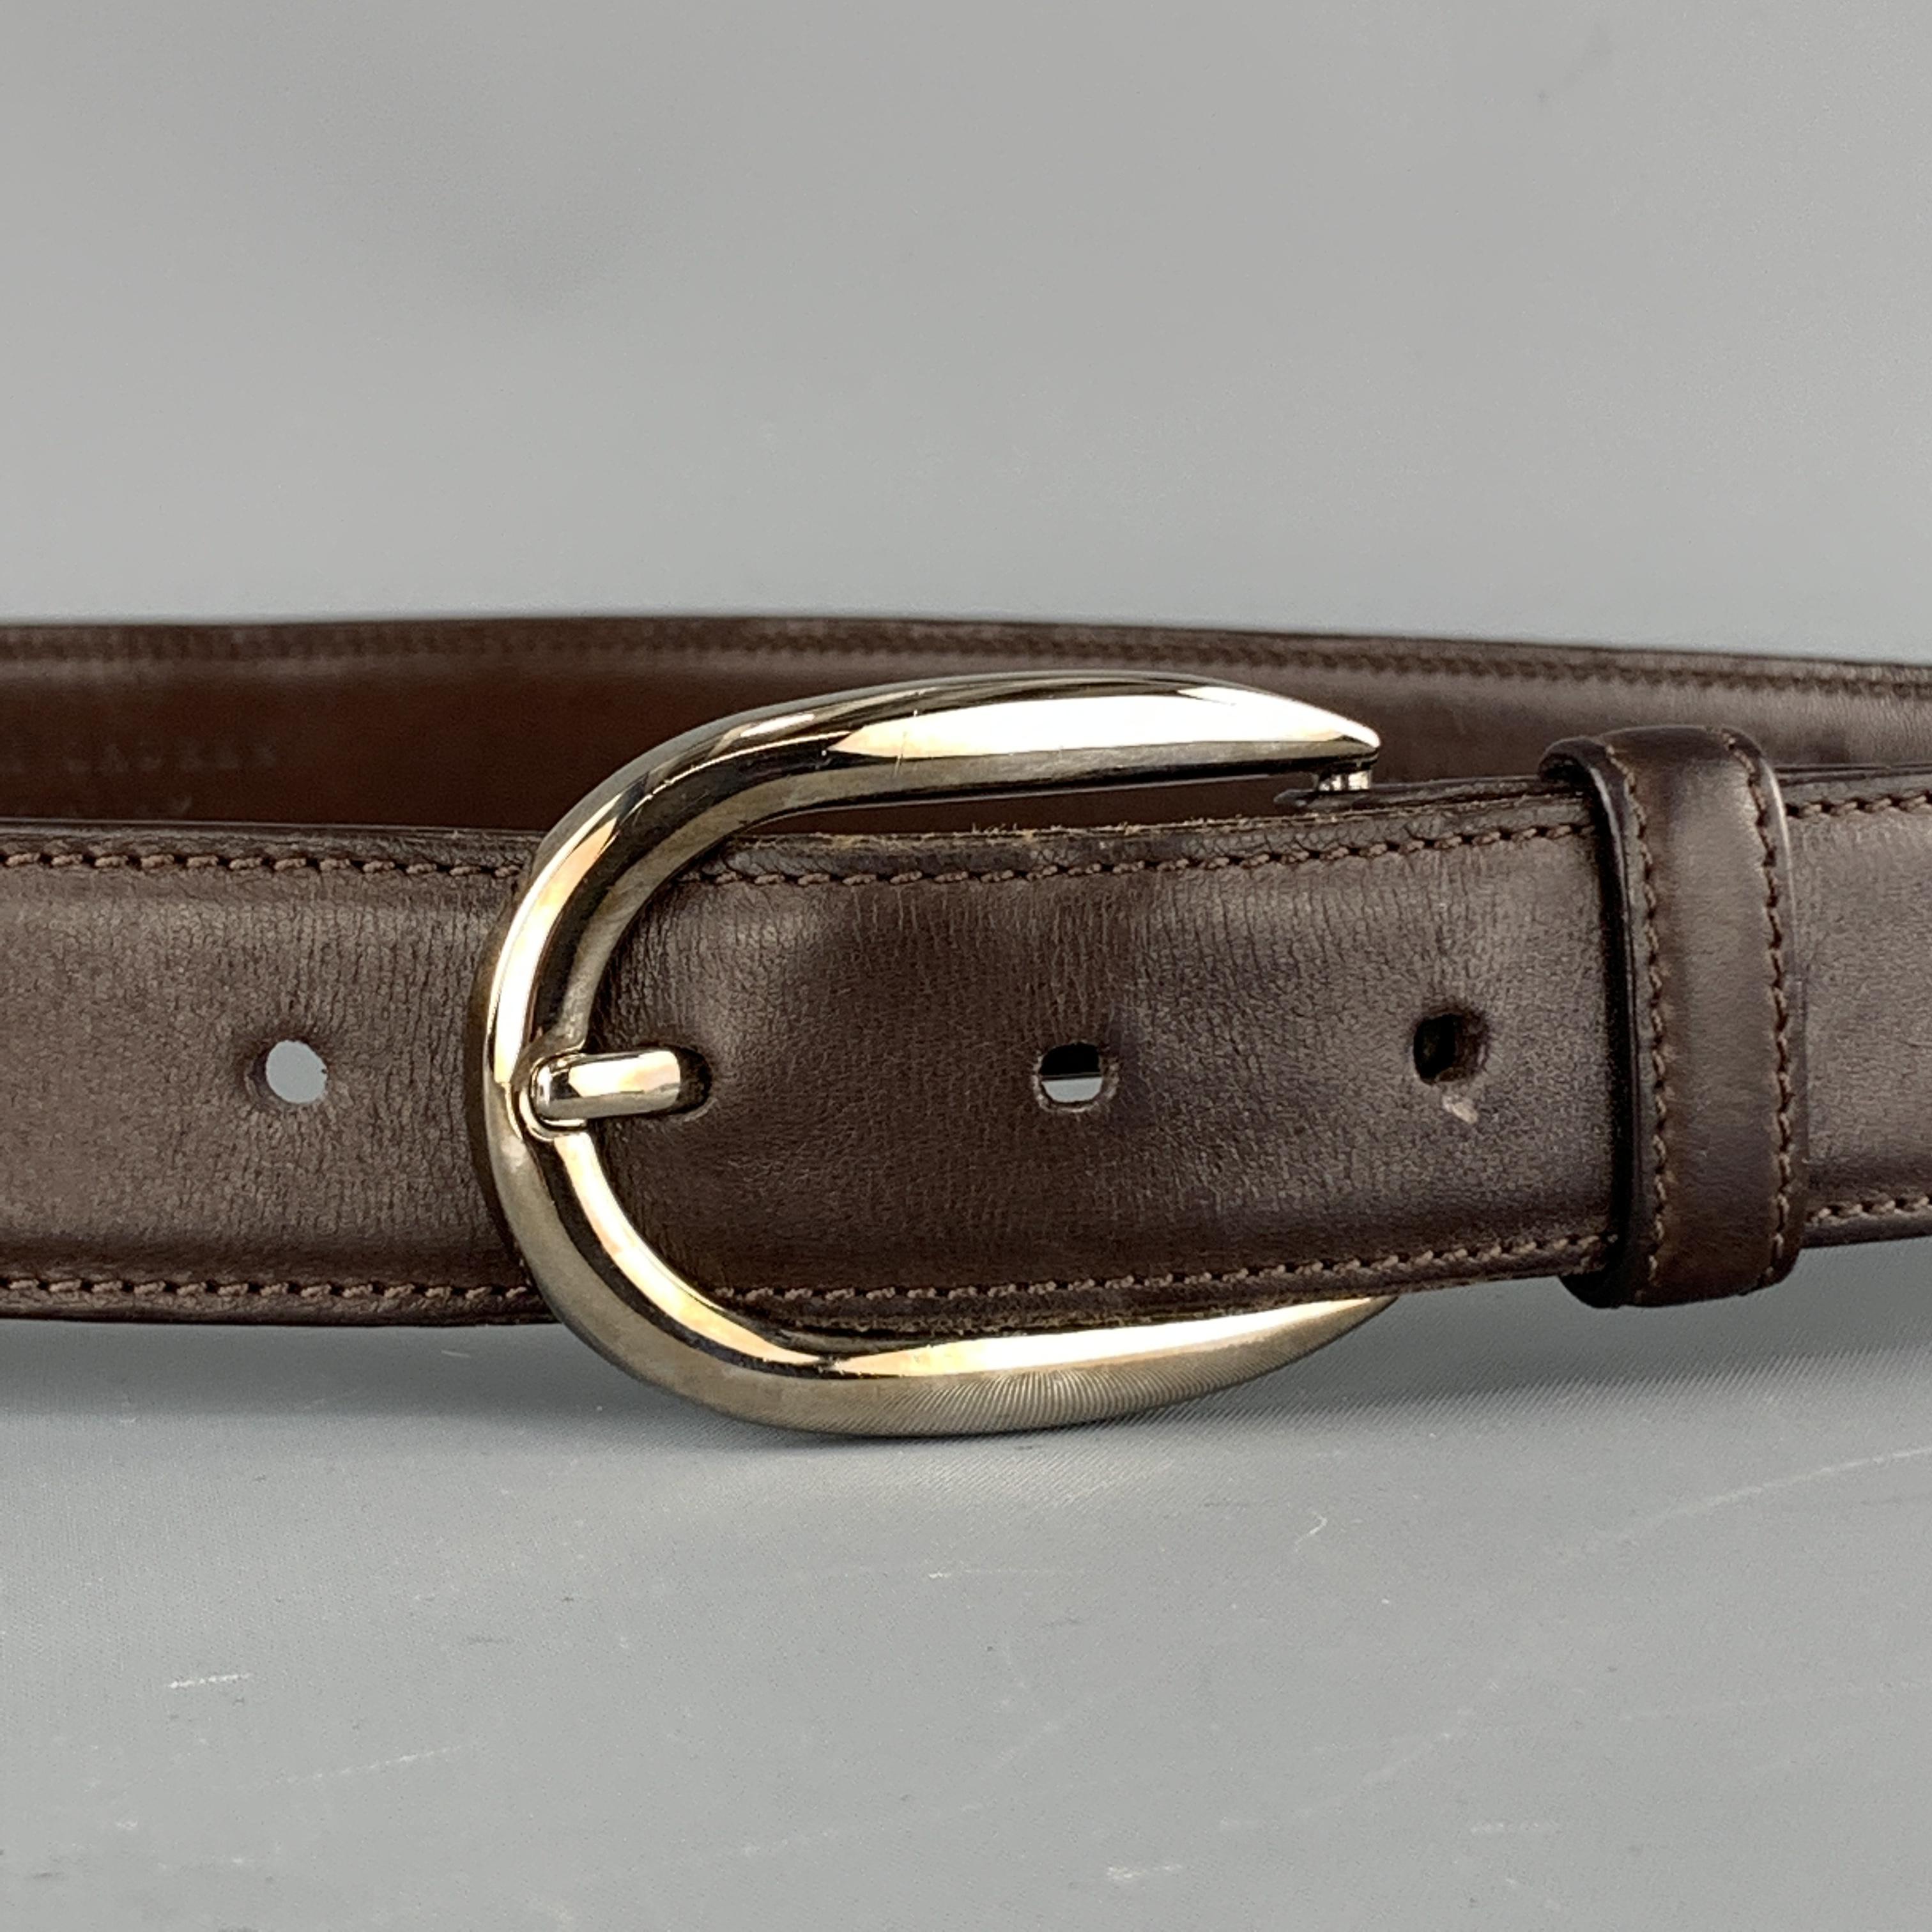 RALPH LAUREN belt features a brown leather strap and light gold tone D shaped buckle. Made in Italy.

Very Good Pre-Owned Condition.
Marked:  32/80

Length: 40 in.
Width: 1.25 in.
Fits: 31.5-35.5 in. 